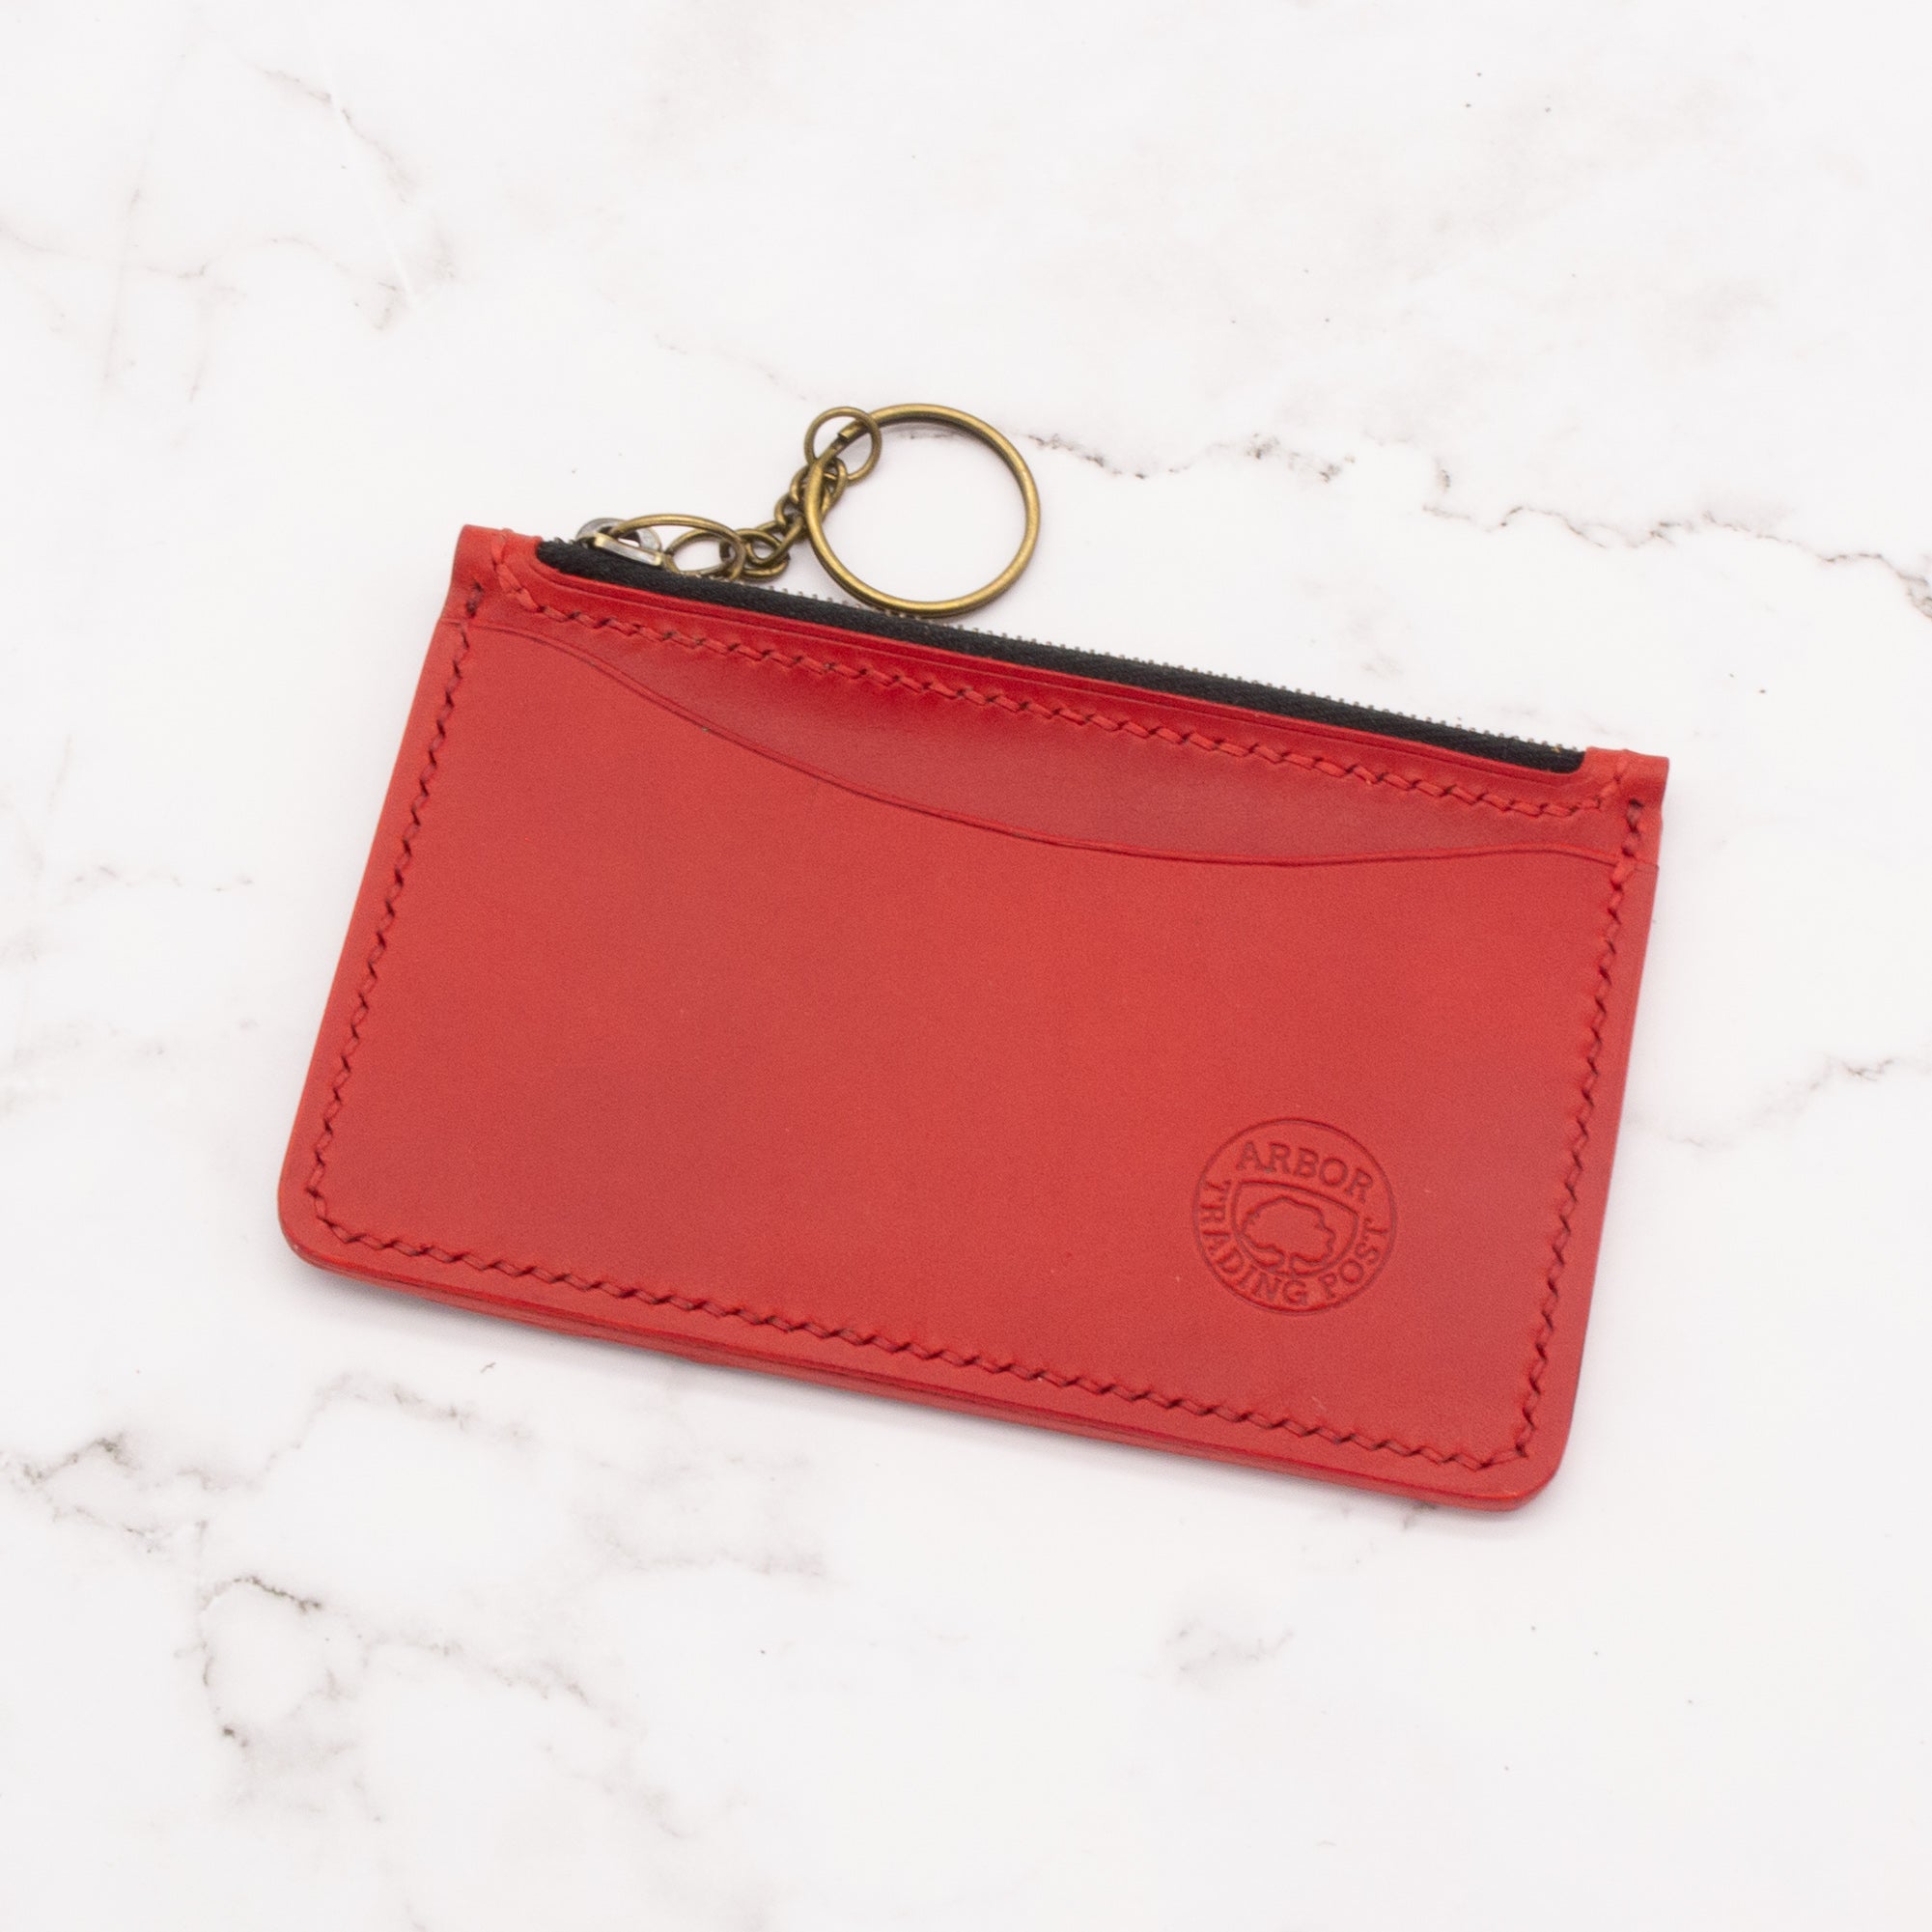 Medium Leather Wallet with Top Zipper and Key Ring